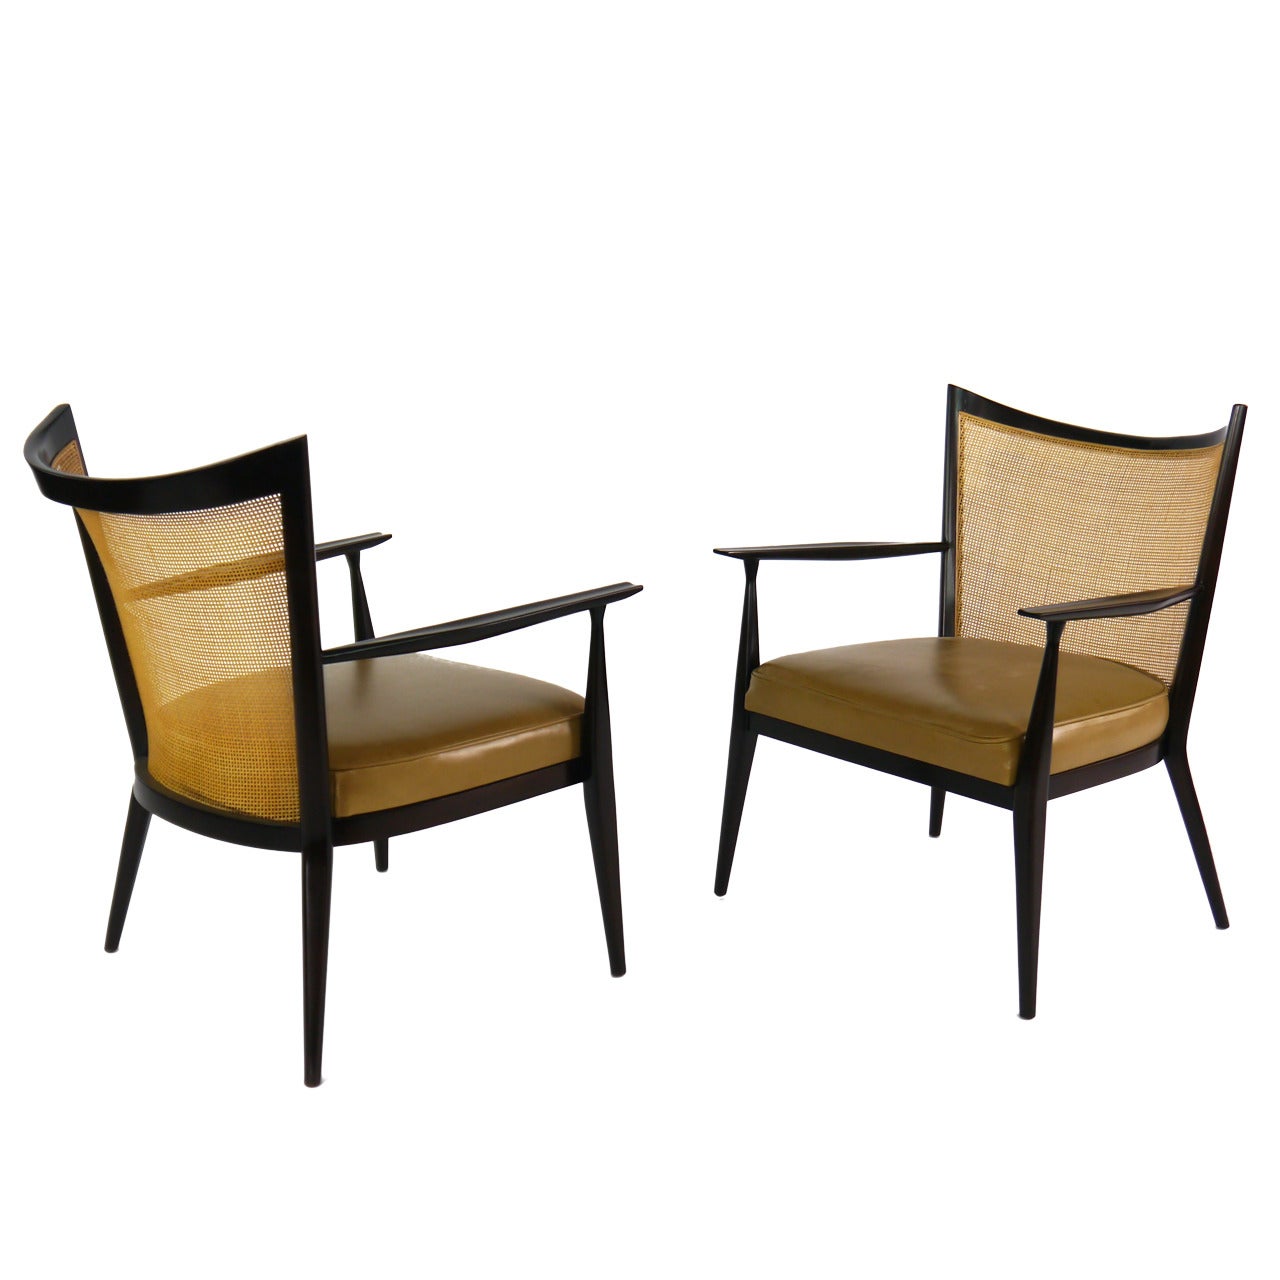 Elegant Lounge Chairs in Cane and Leather by Paul Mccobb